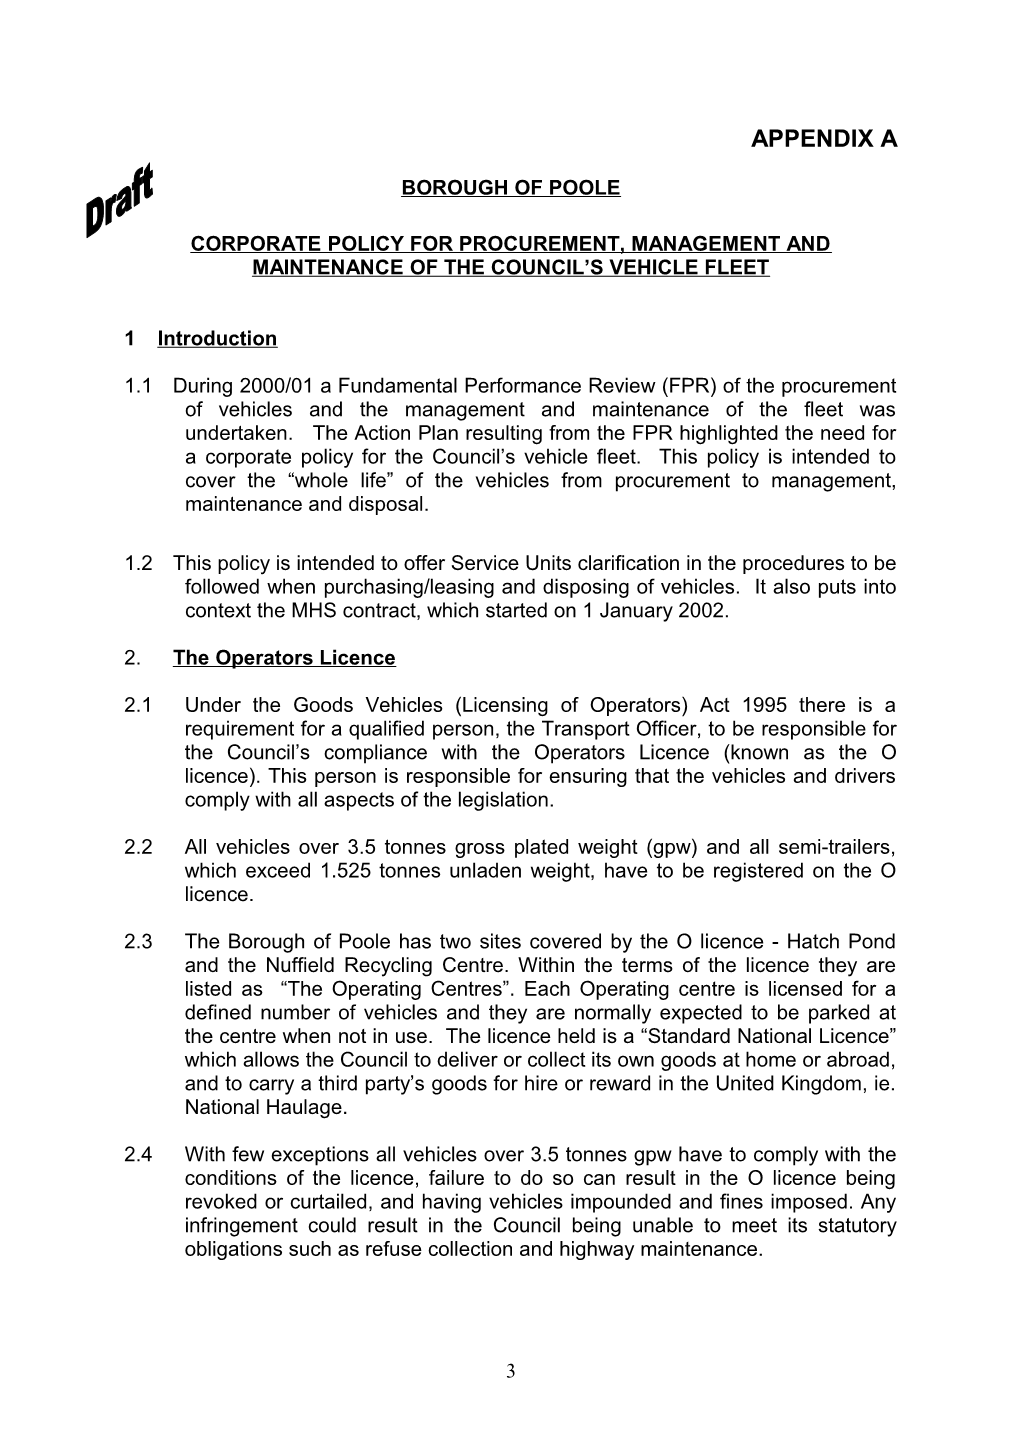 The Proposed Corporate Policy for Procurement, Management and Maintenance of the Council